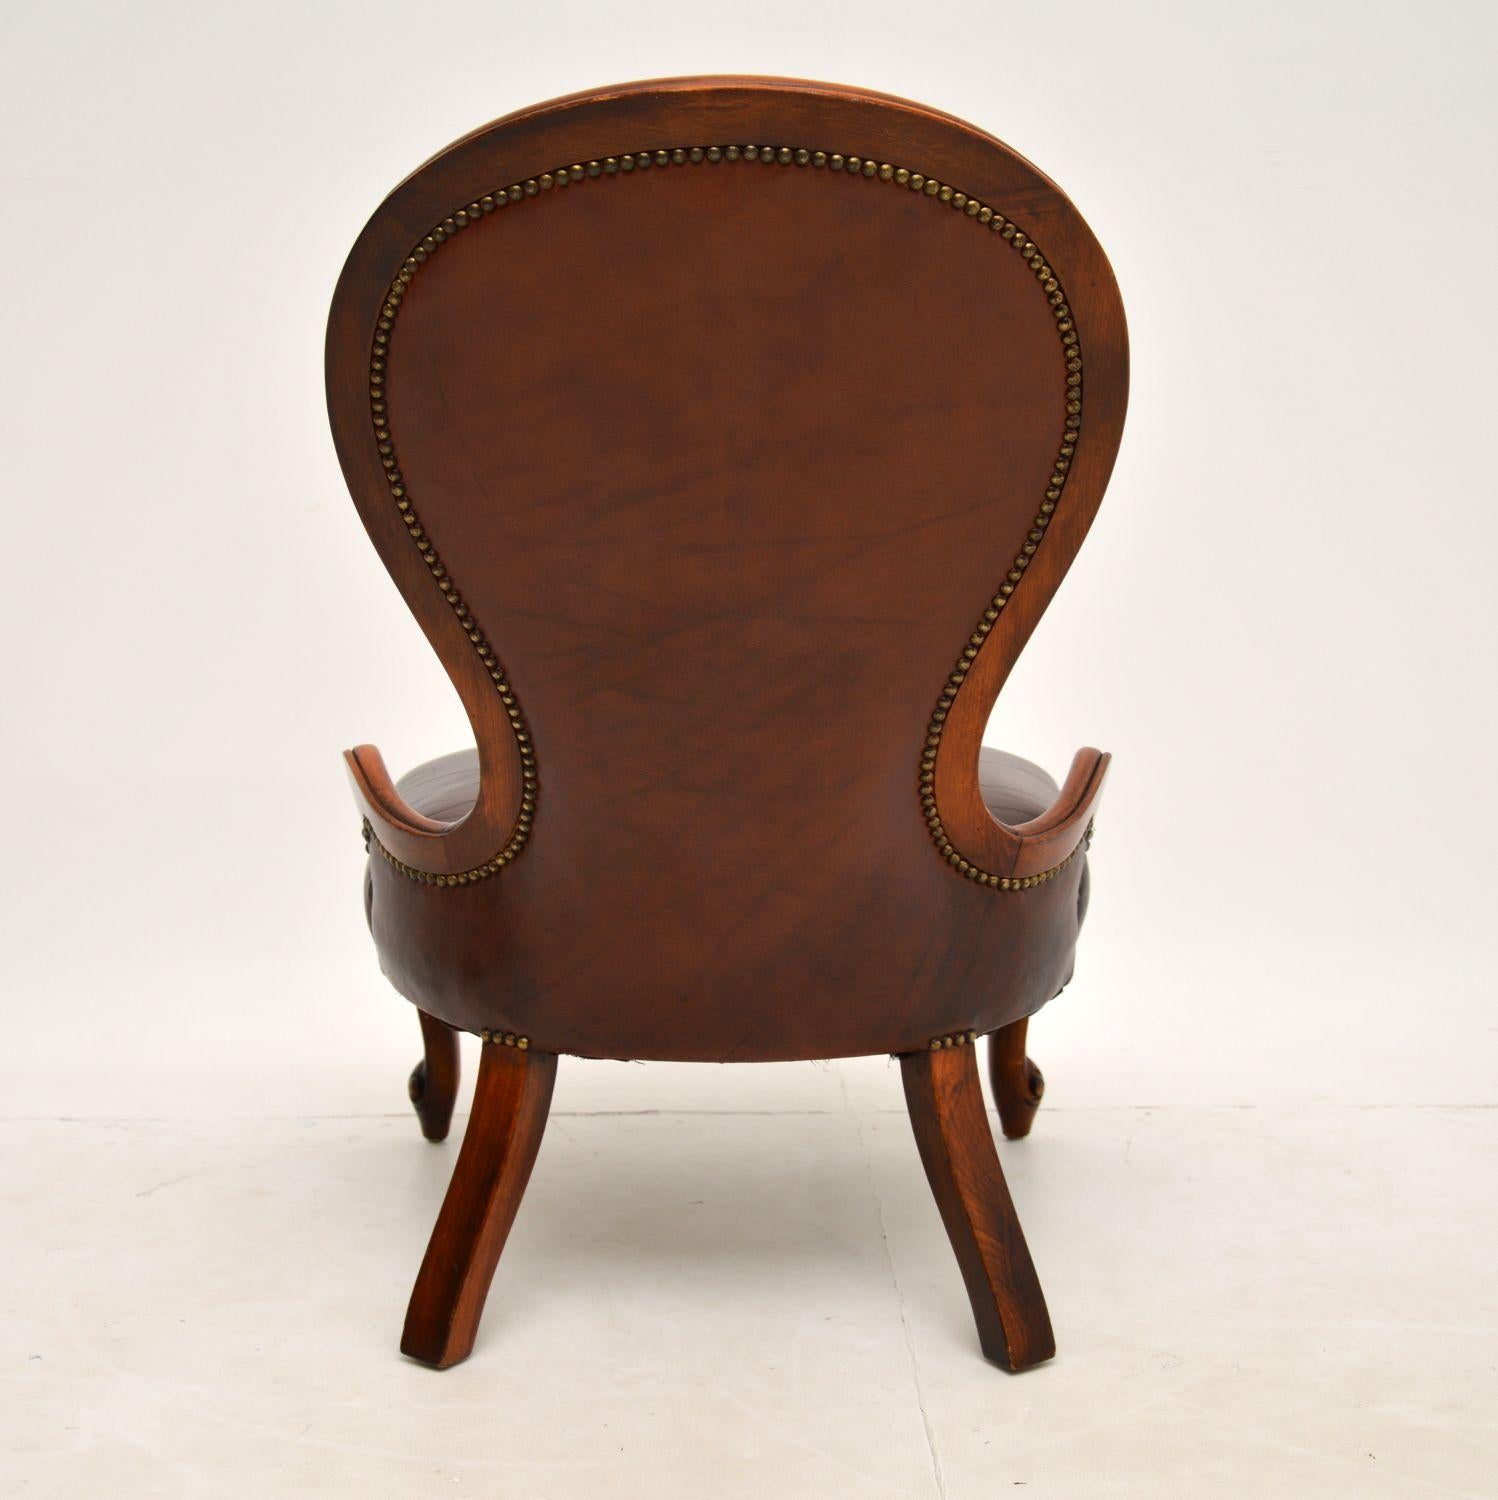 English Antique Victorian Style Leather Spoon Back Chair